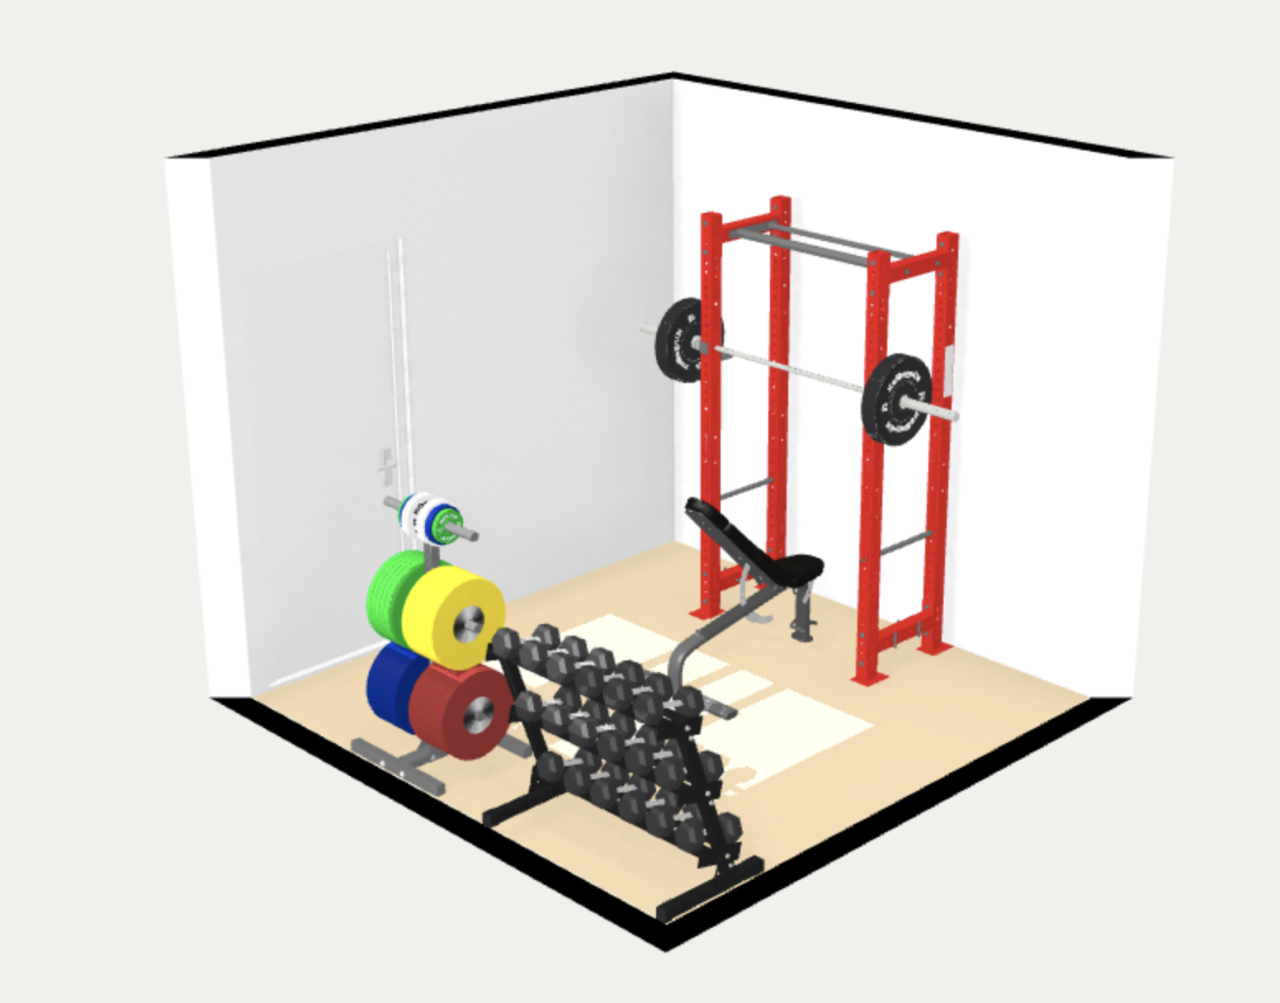 A 3d layout/floor plan for a 100 sq ft (10' x 10') home gym.